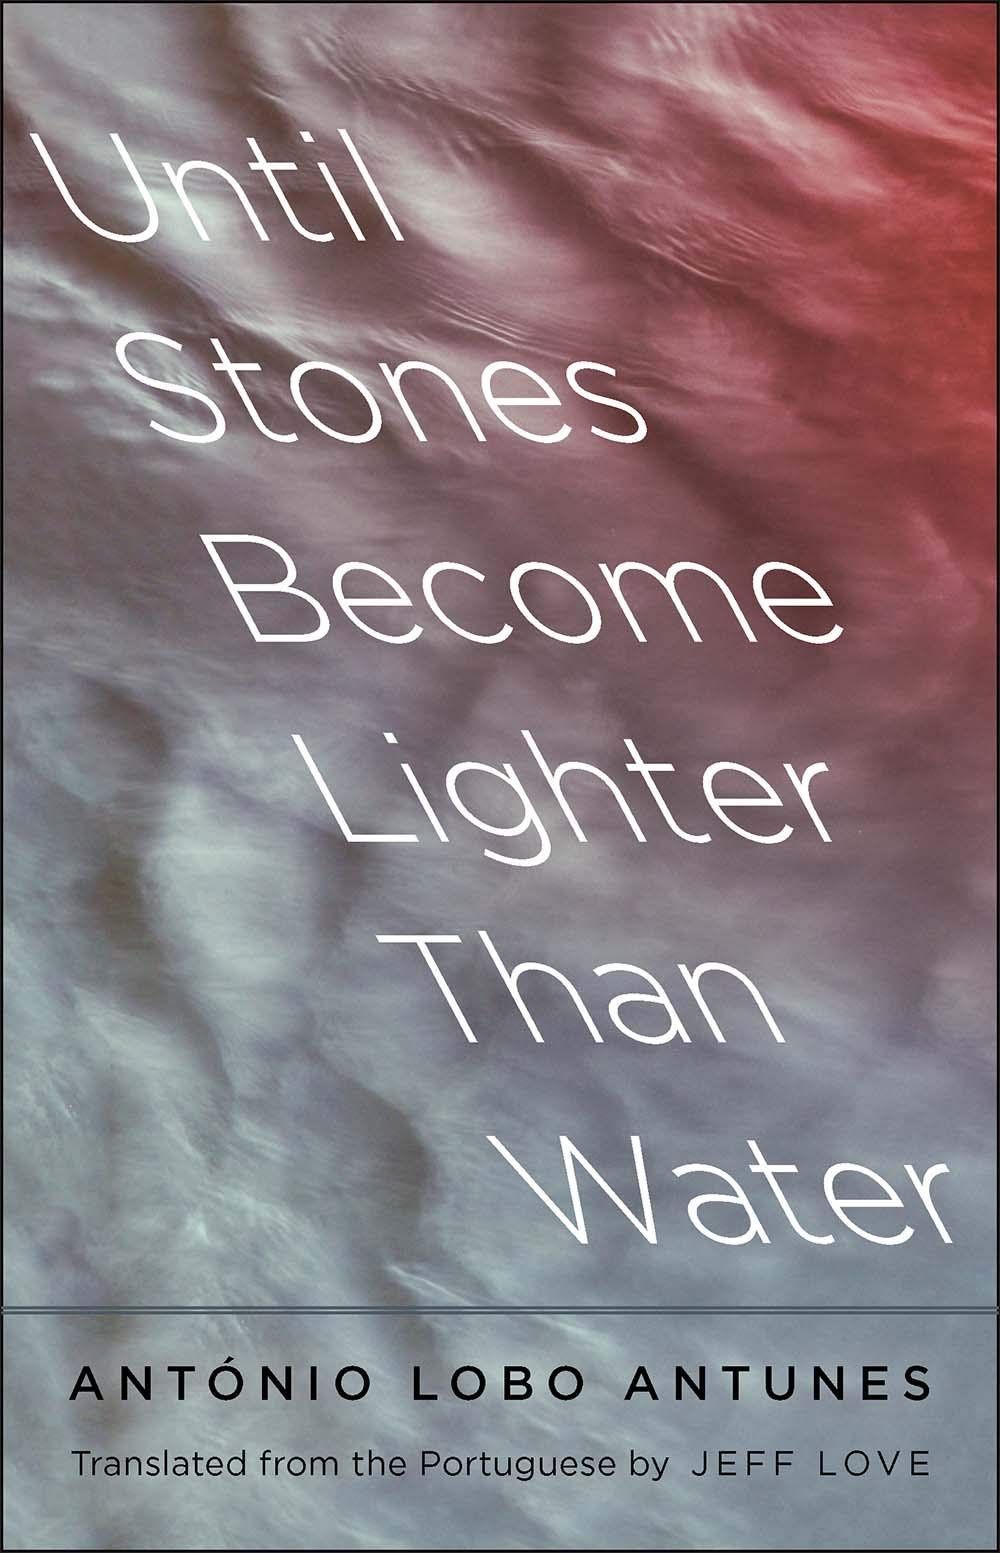 The Inhospitable Wilderness of António Lobo Antunes’s “Until Stones Become Lighter Than Water”